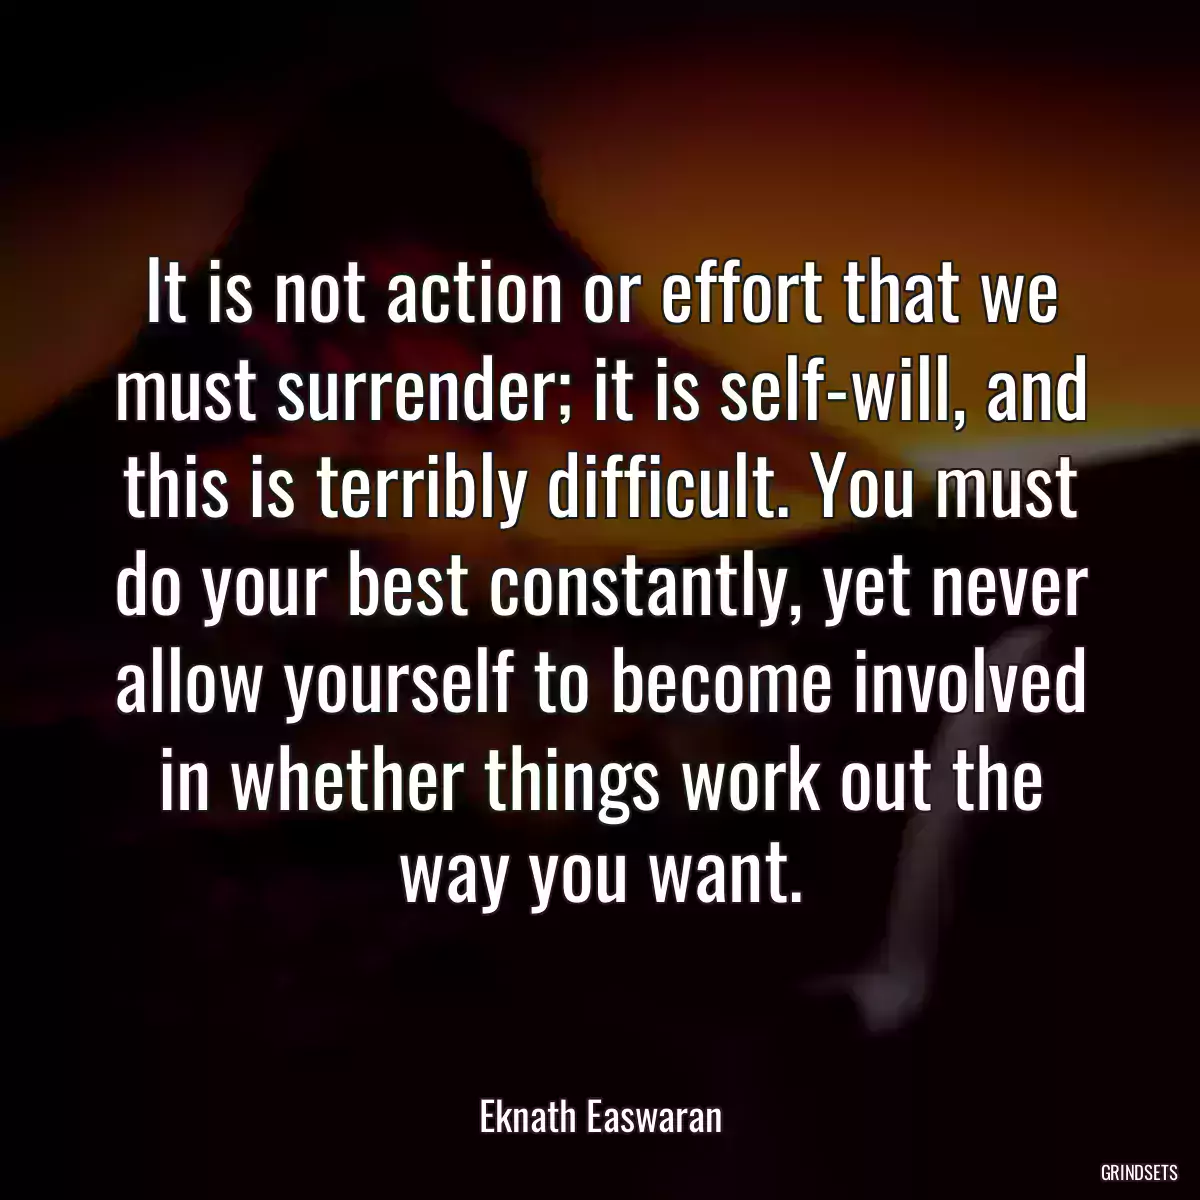 It is not action or effort that we must surrender; it is self-will, and this is terribly difficult. You must do your best constantly, yet never allow yourself to become involved in whether things work out the way you want.